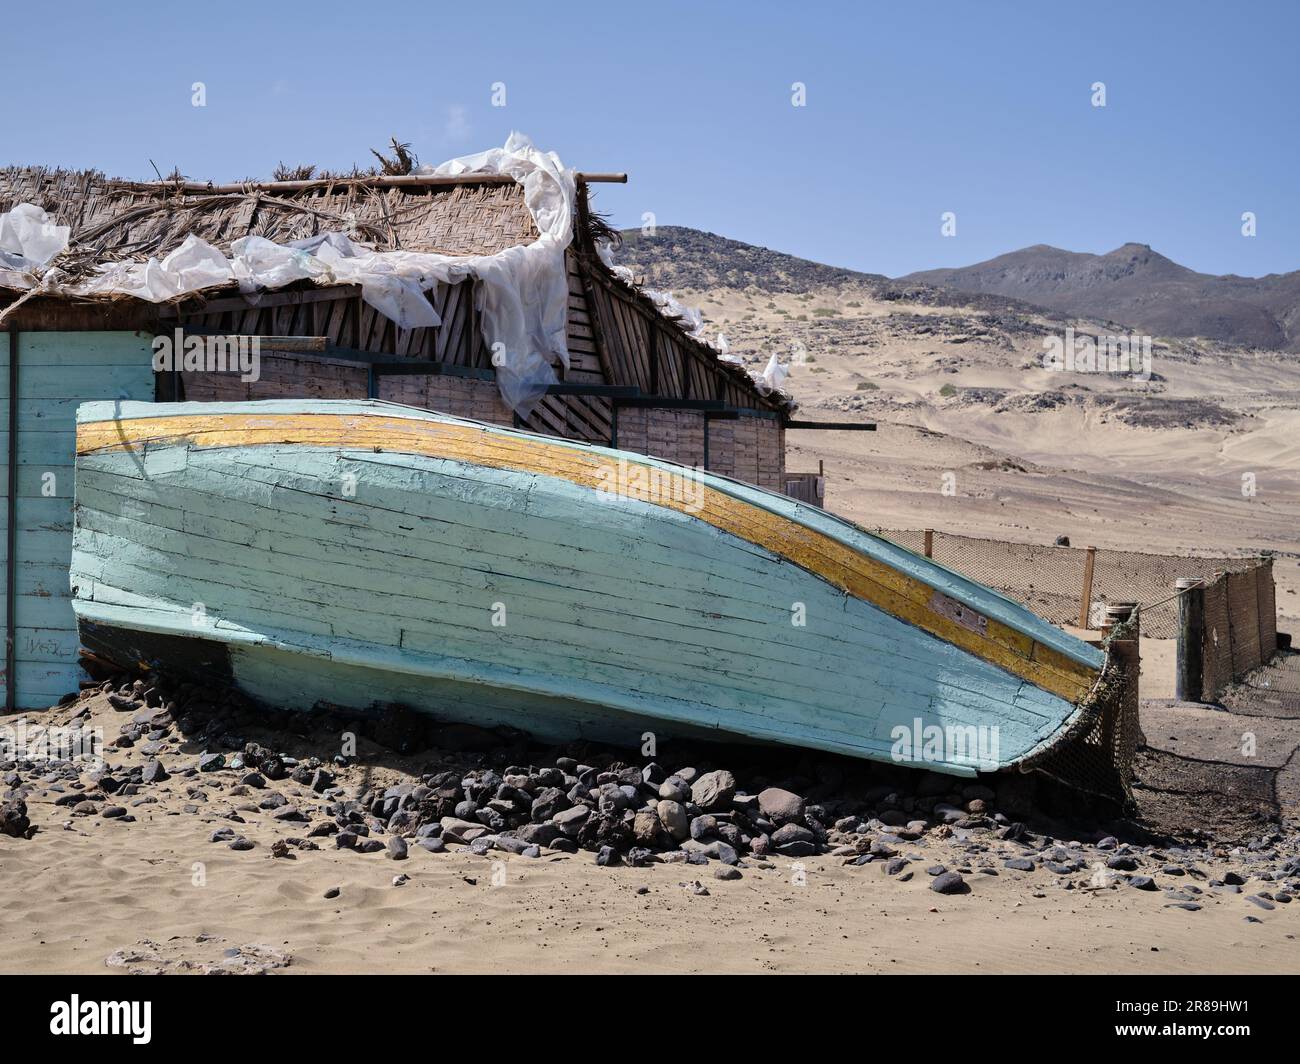 An upturned boat in the desert in Salamansa village, sao Vicente, Cabo verde Stock Photo